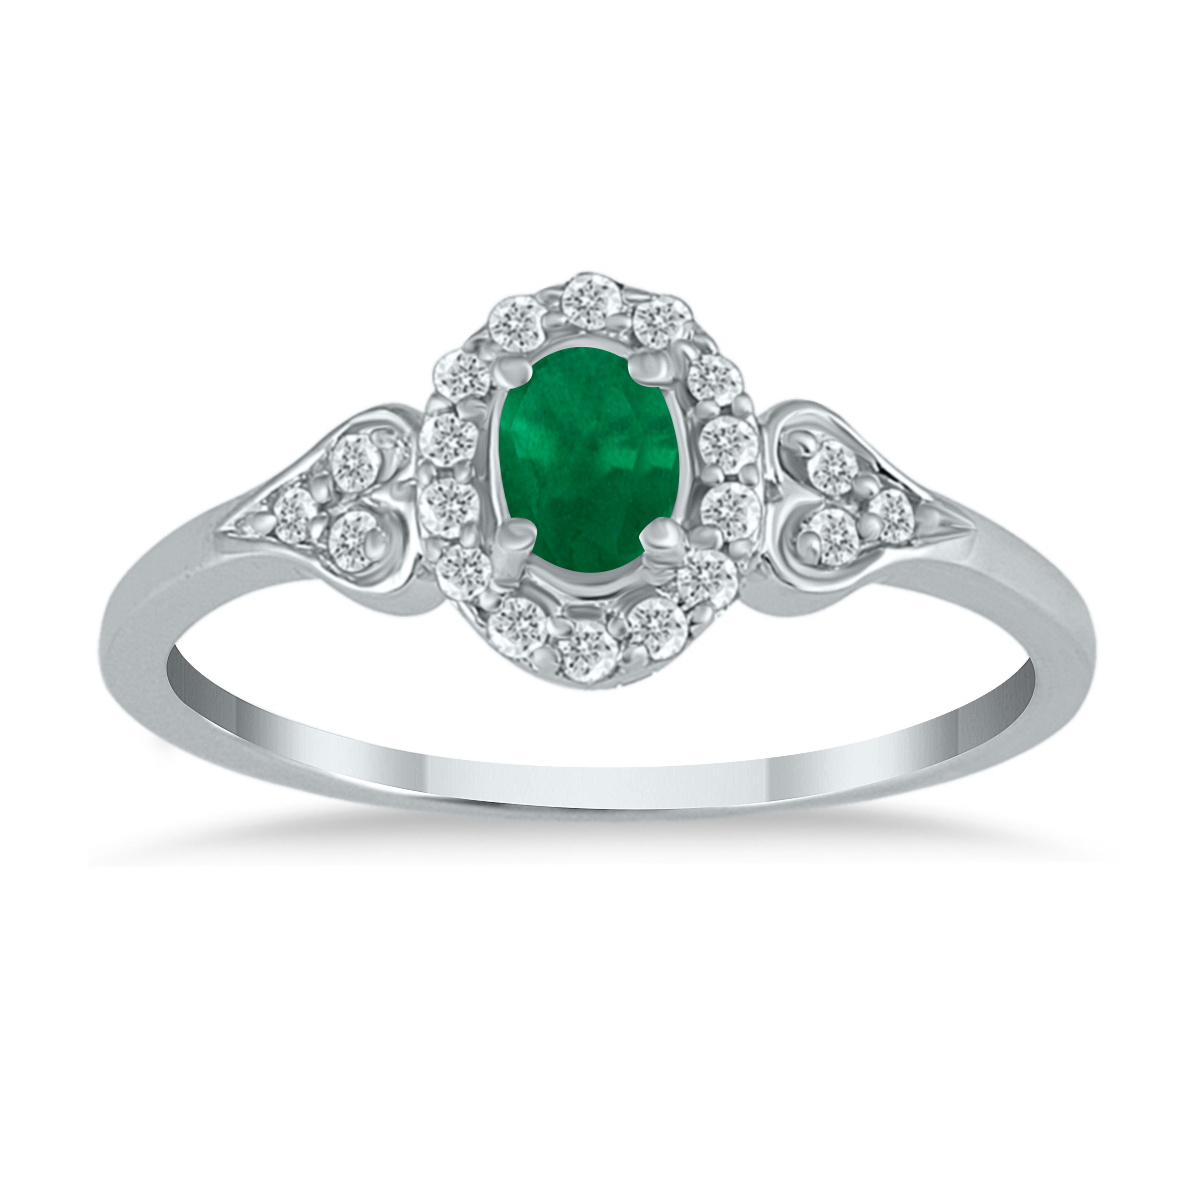 Emerald and Diamond Ring in 10K White Gold